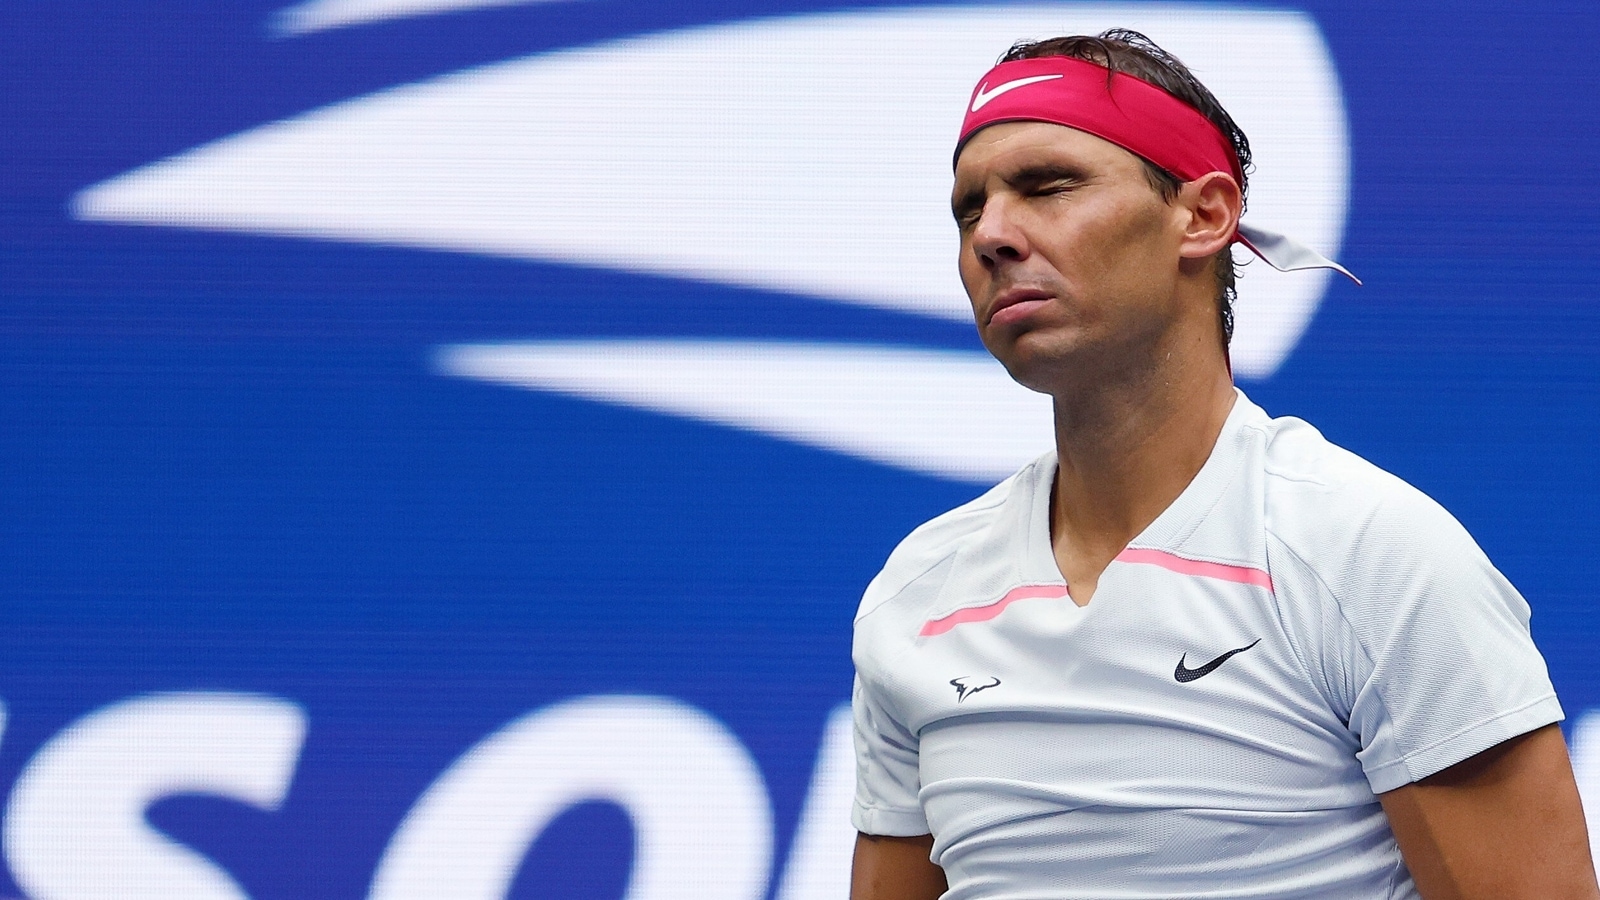 Rafael Nadal knocked out of US Open 2022, loses to Frances Tiafoe in